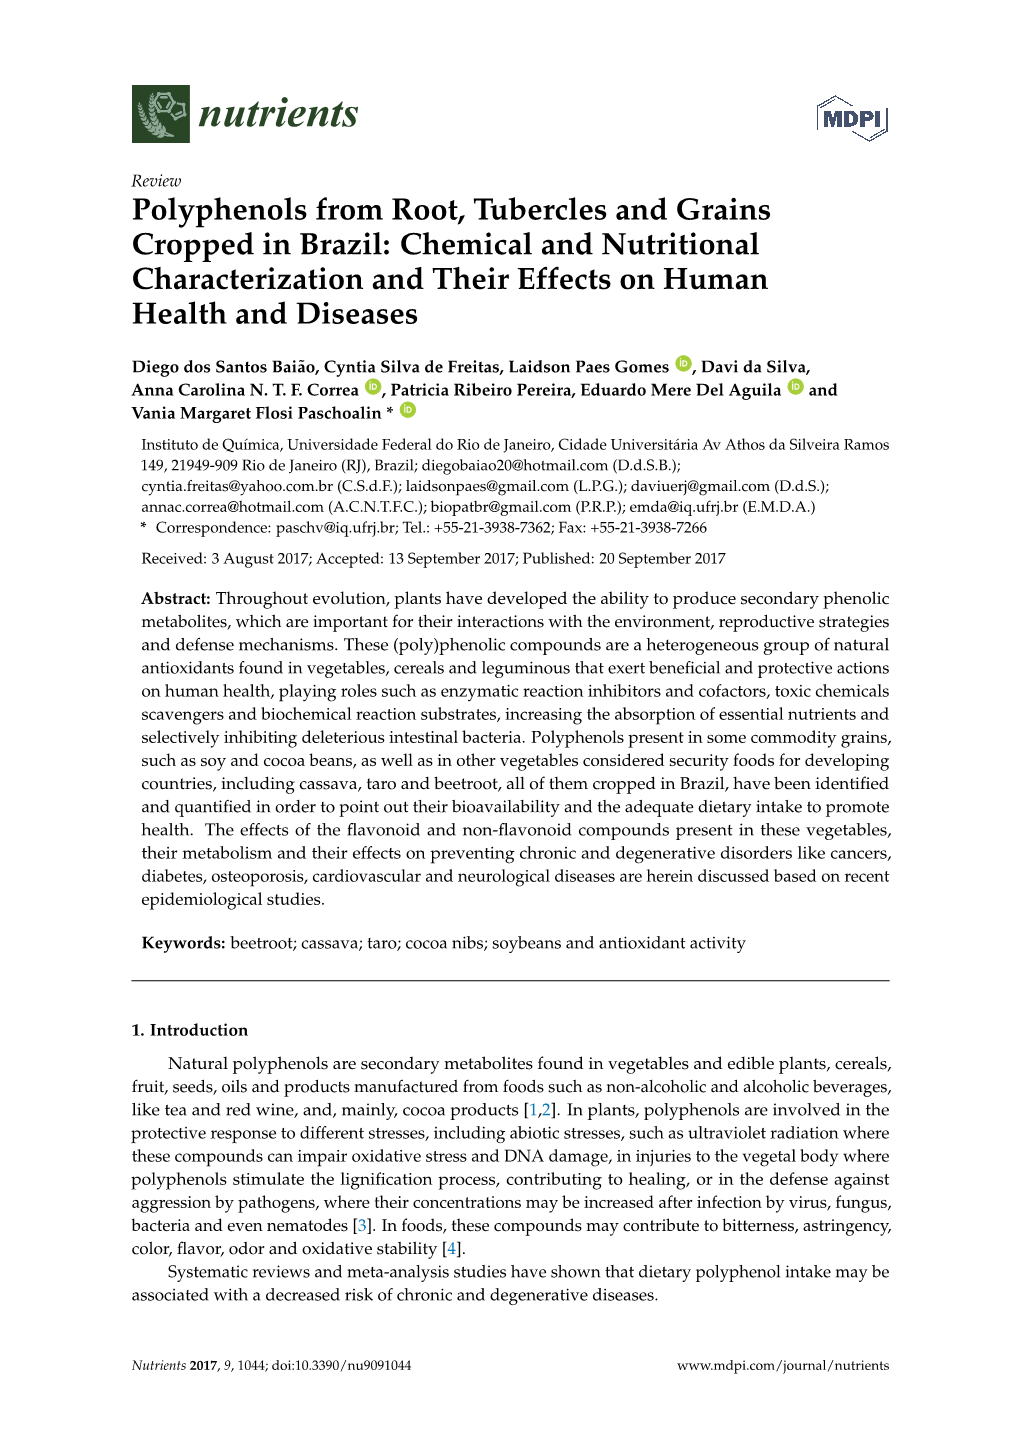 Chemical and Nutritional Characterization and Their Effects on Human Health and Diseases